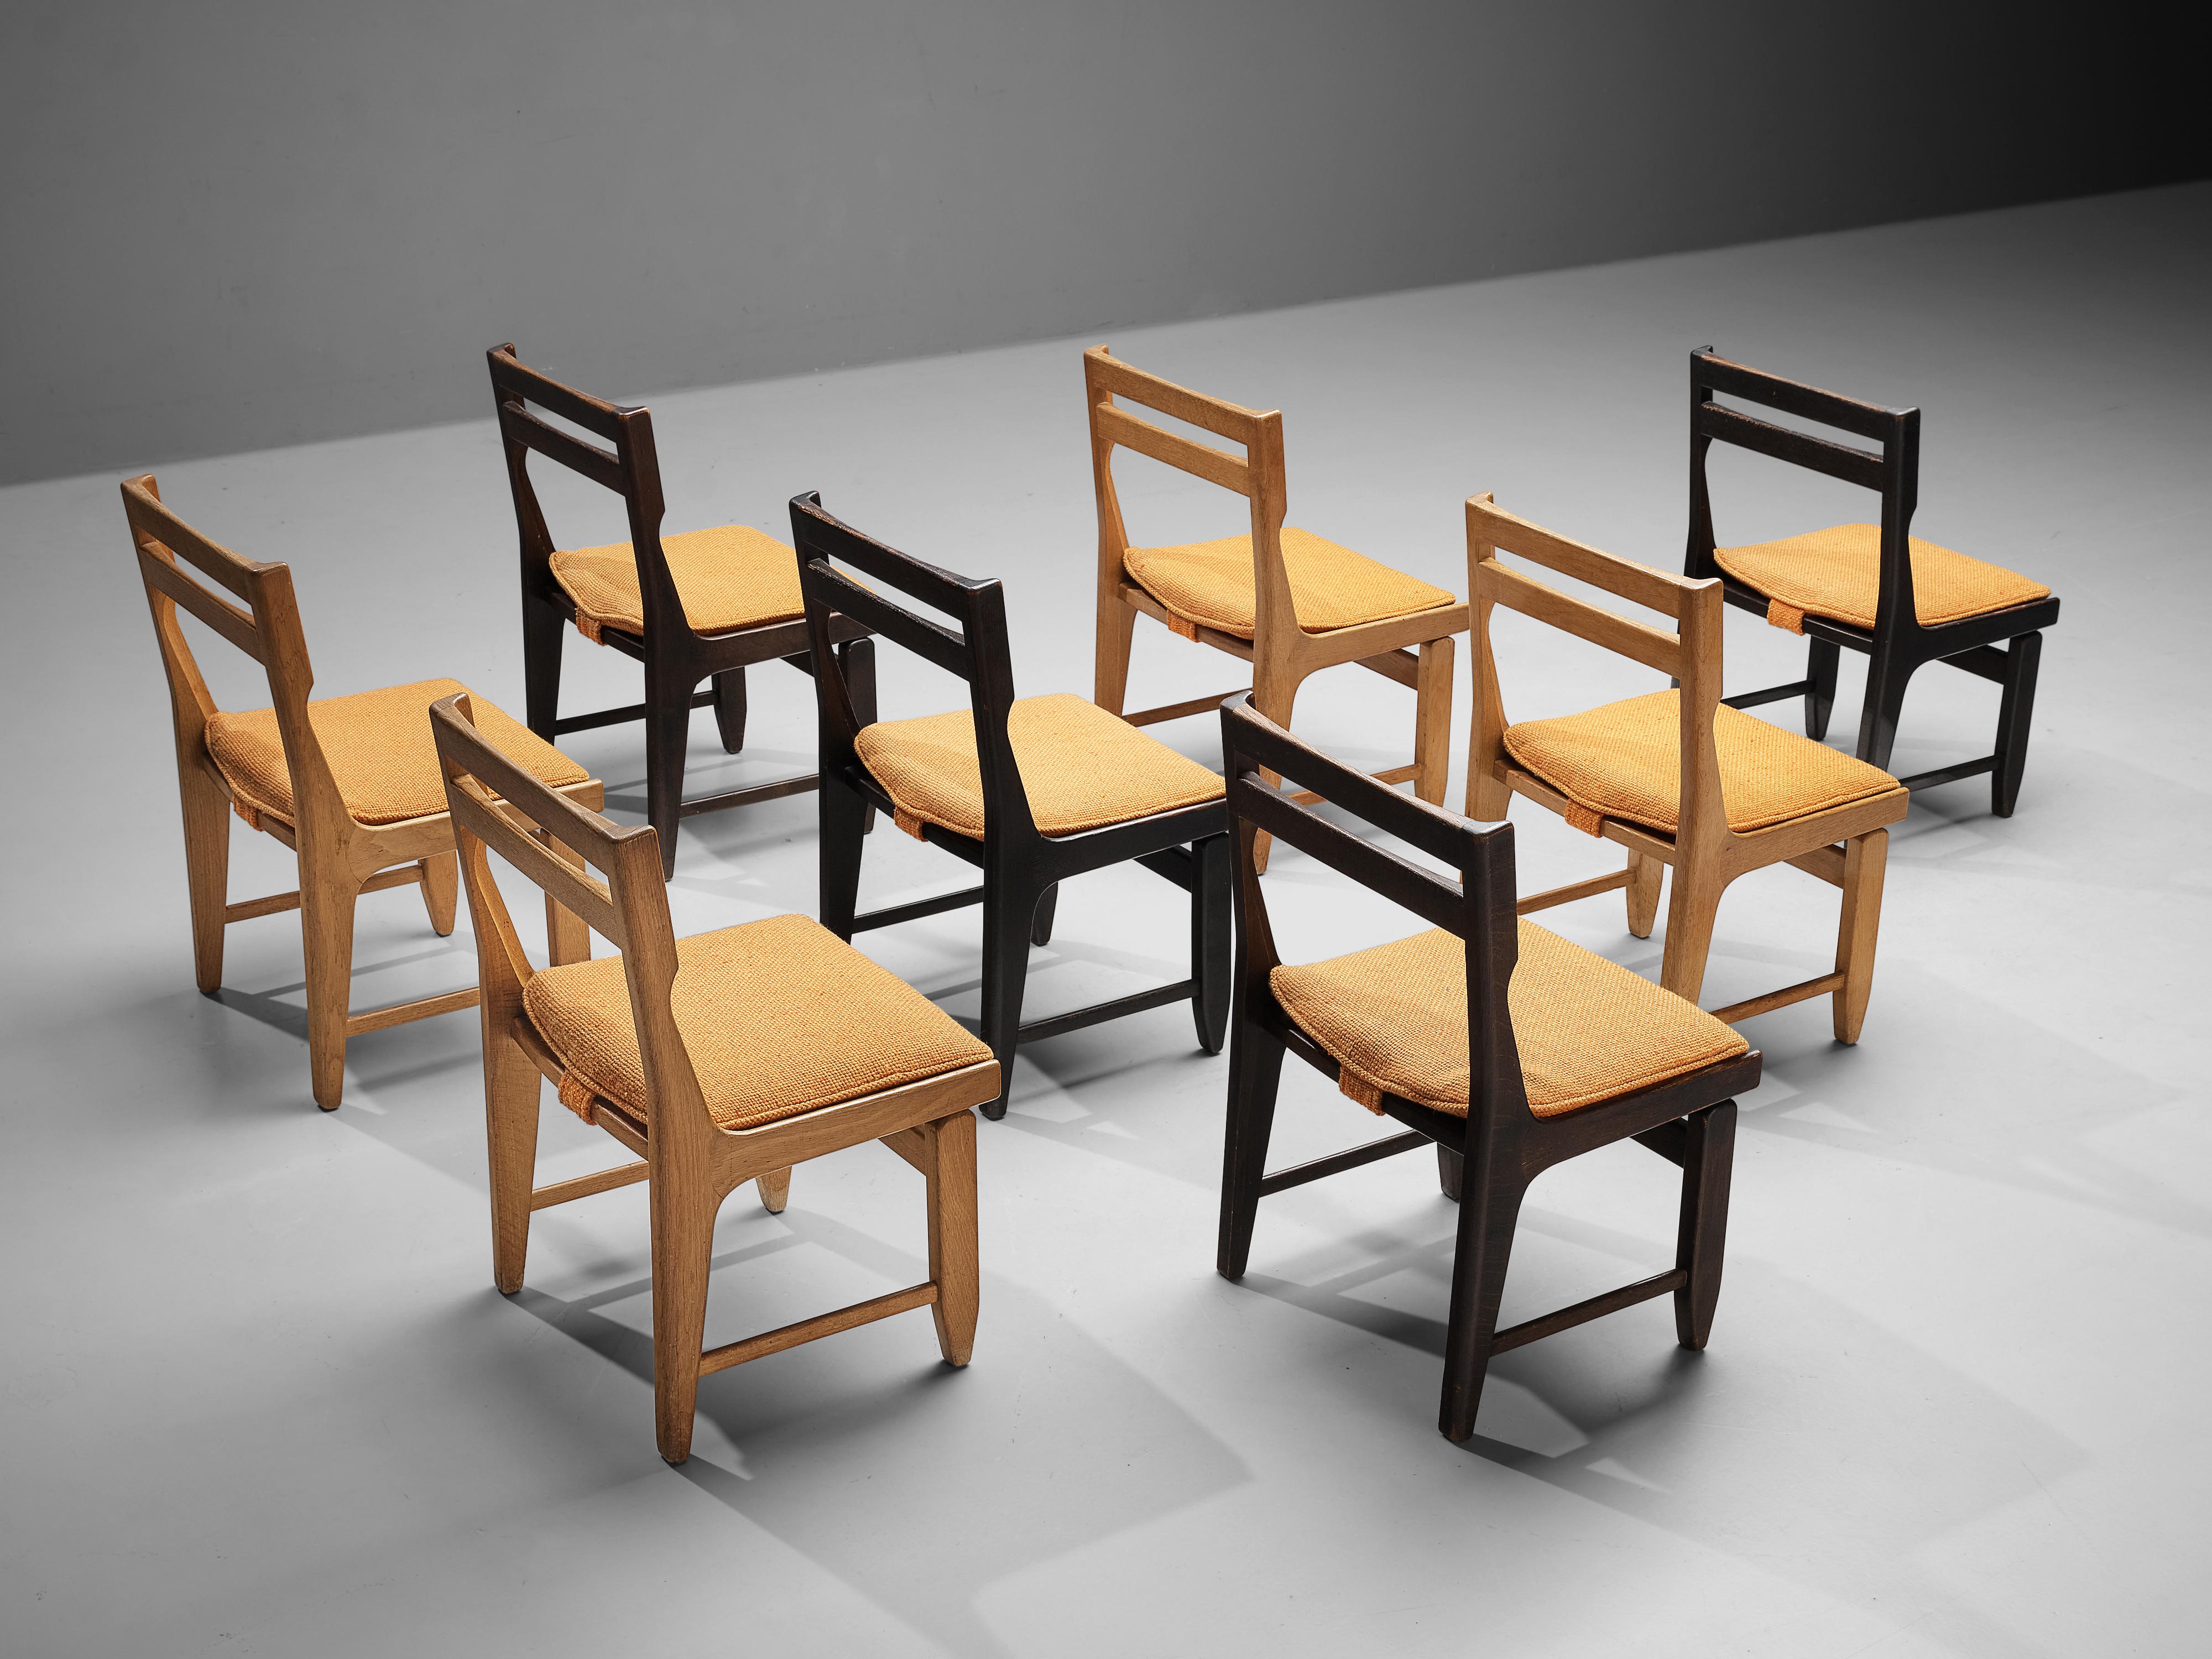 Guillerme et Chambron for Votre Maison, set of eight dining chairs, model 'Raphaël', dark stained oak, fabric upholstery, France, 1960s 

This set of eight dining chairs shows the typical traits of the designs by French designer duo Guillerme et